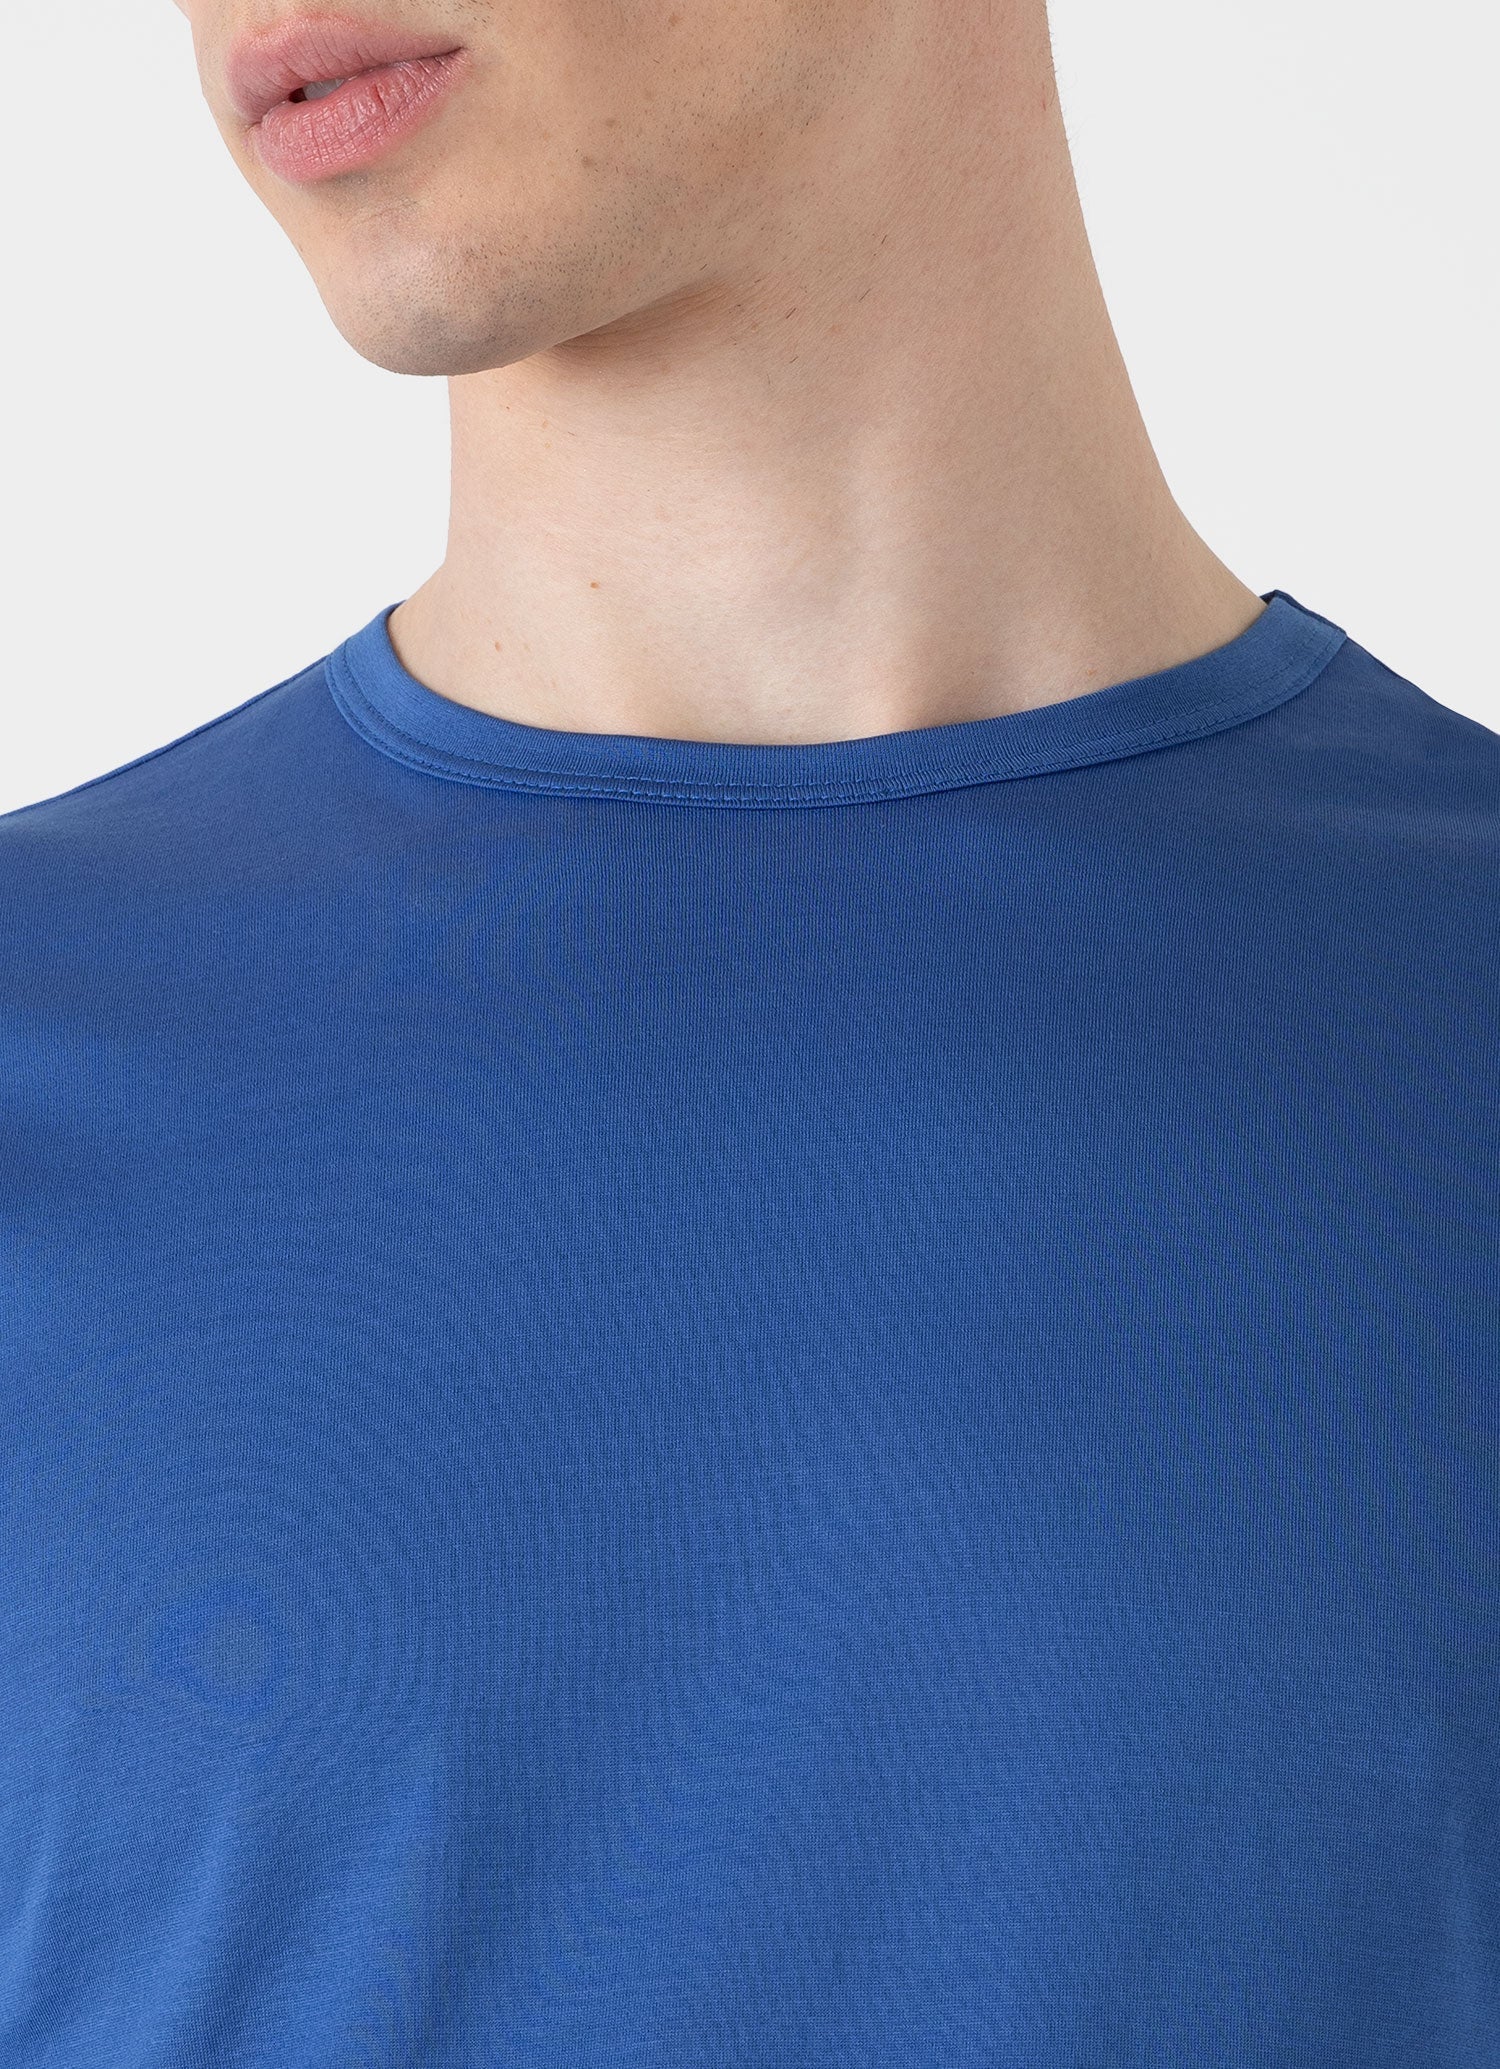 Men's Classic T-shirt in French Blue